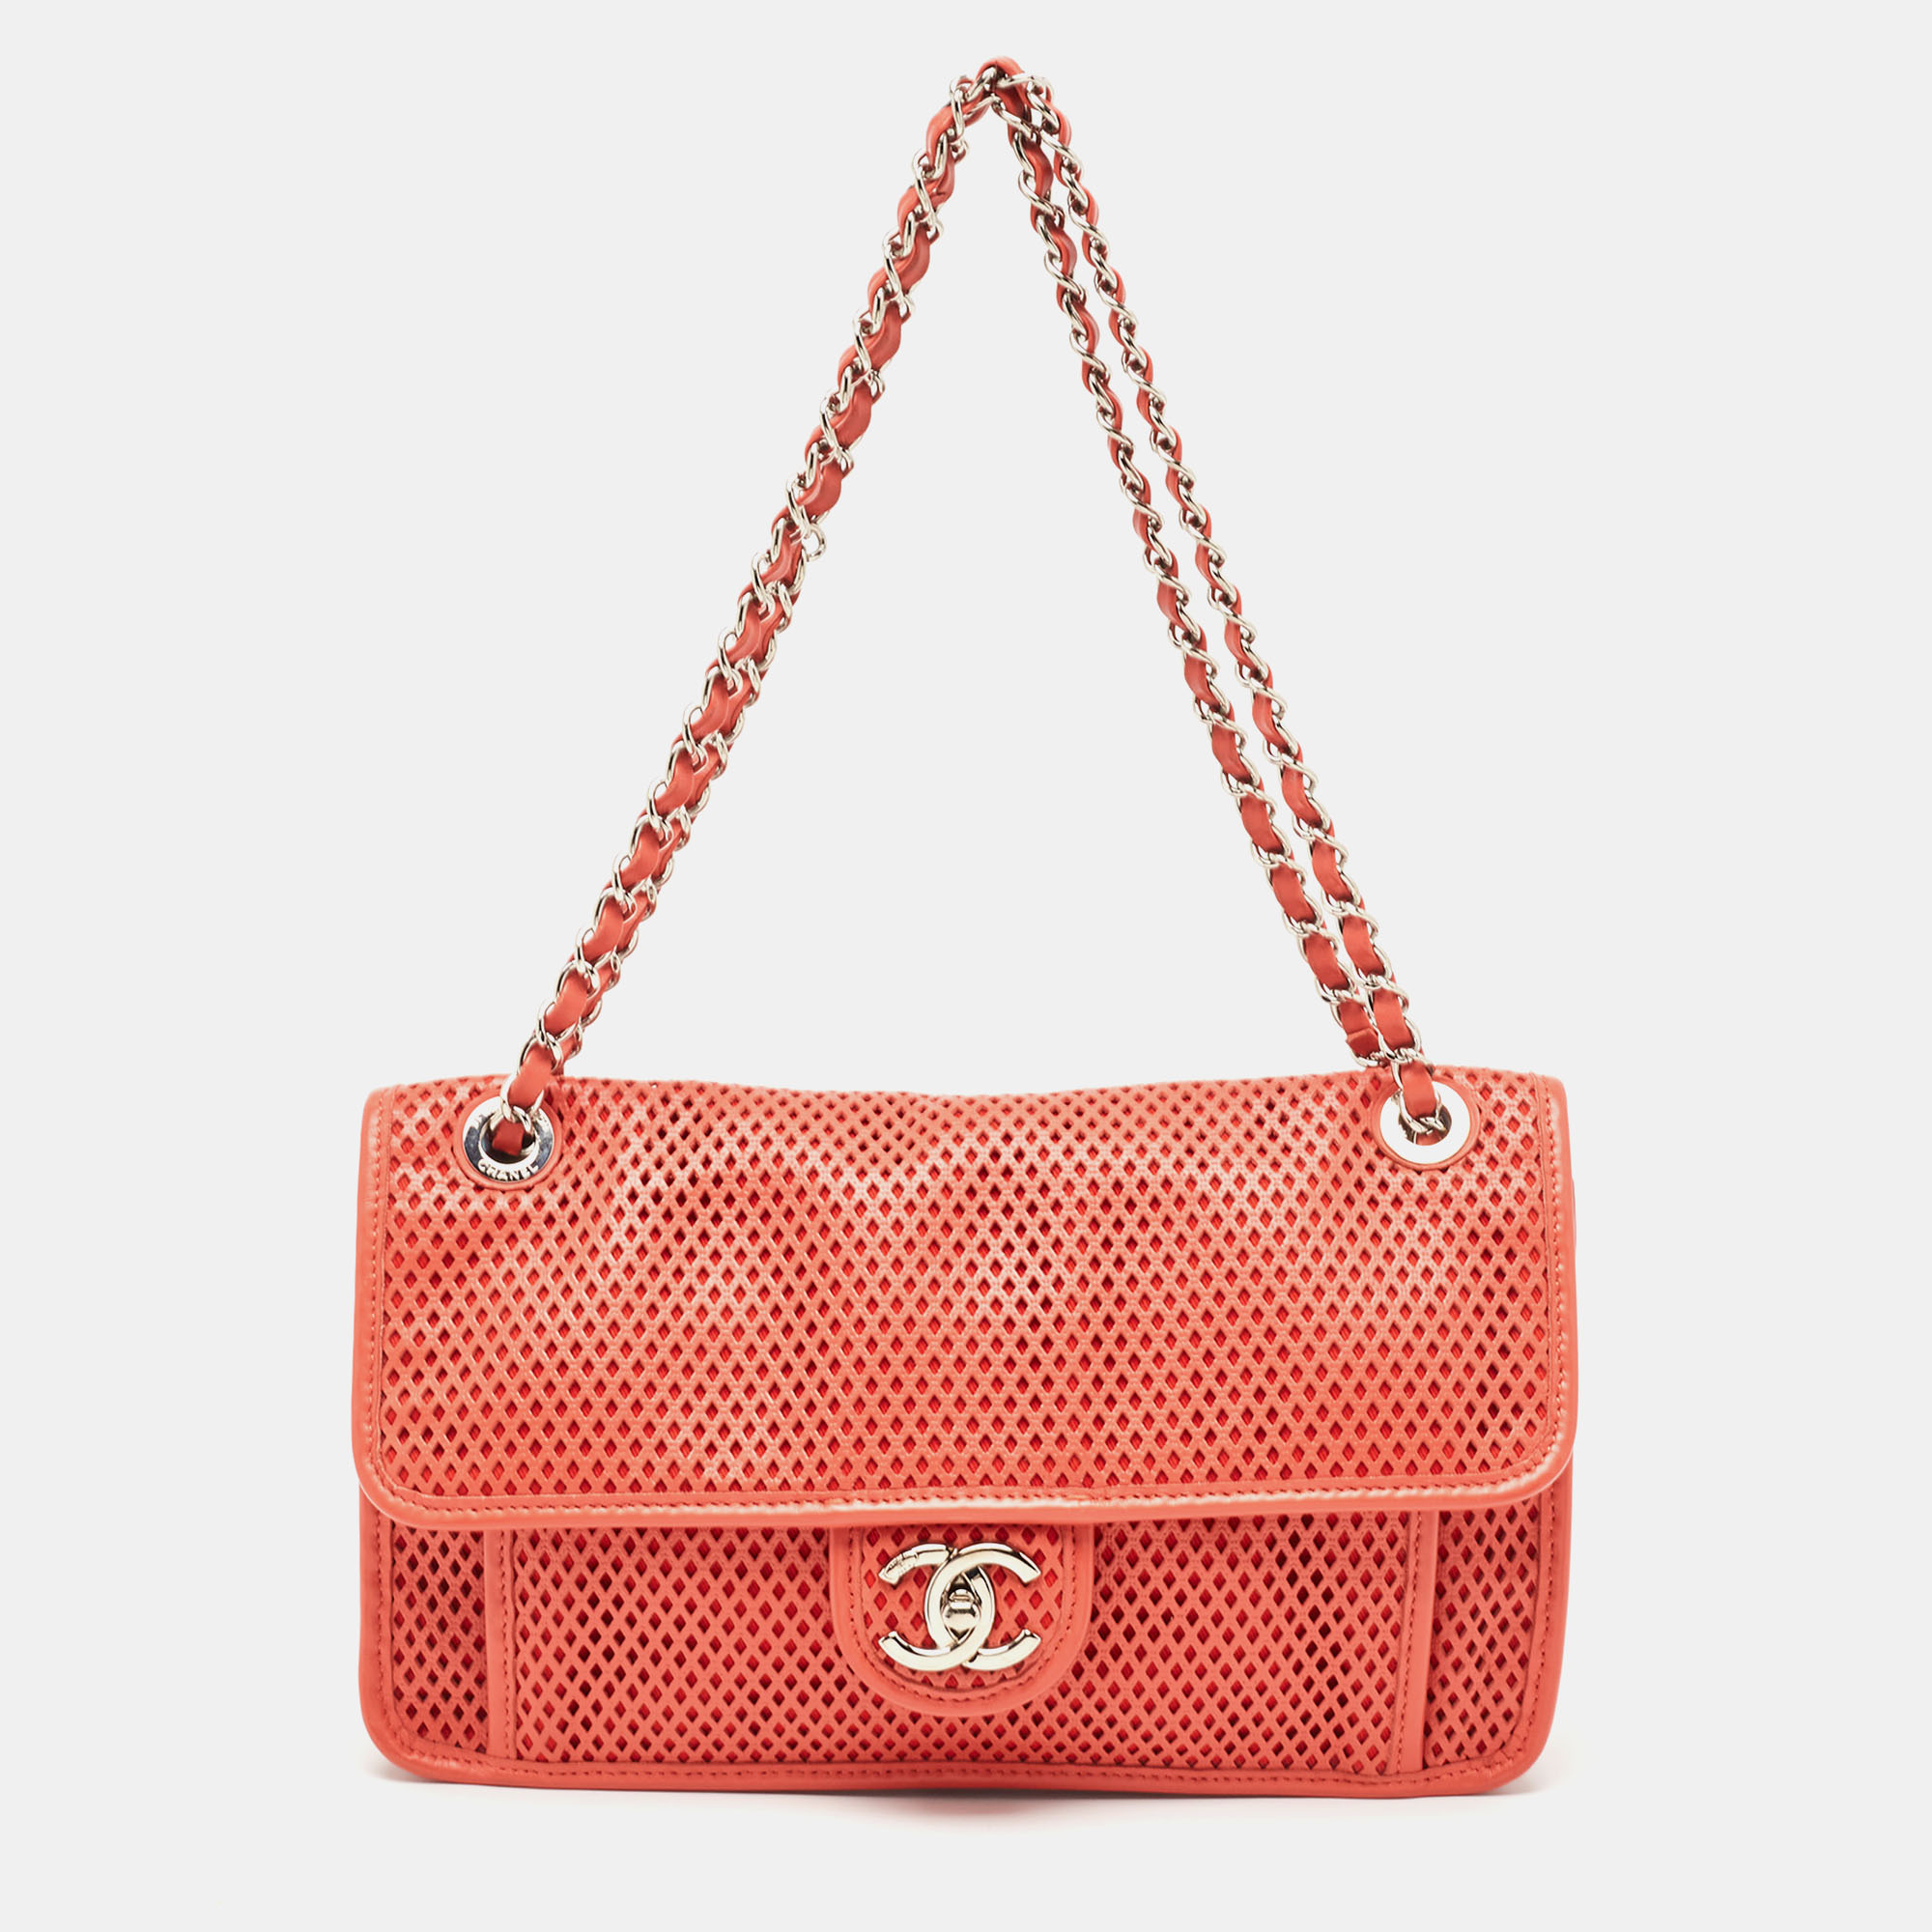 

Chanel Red Perforated Leather Up in the Air Flap Bag